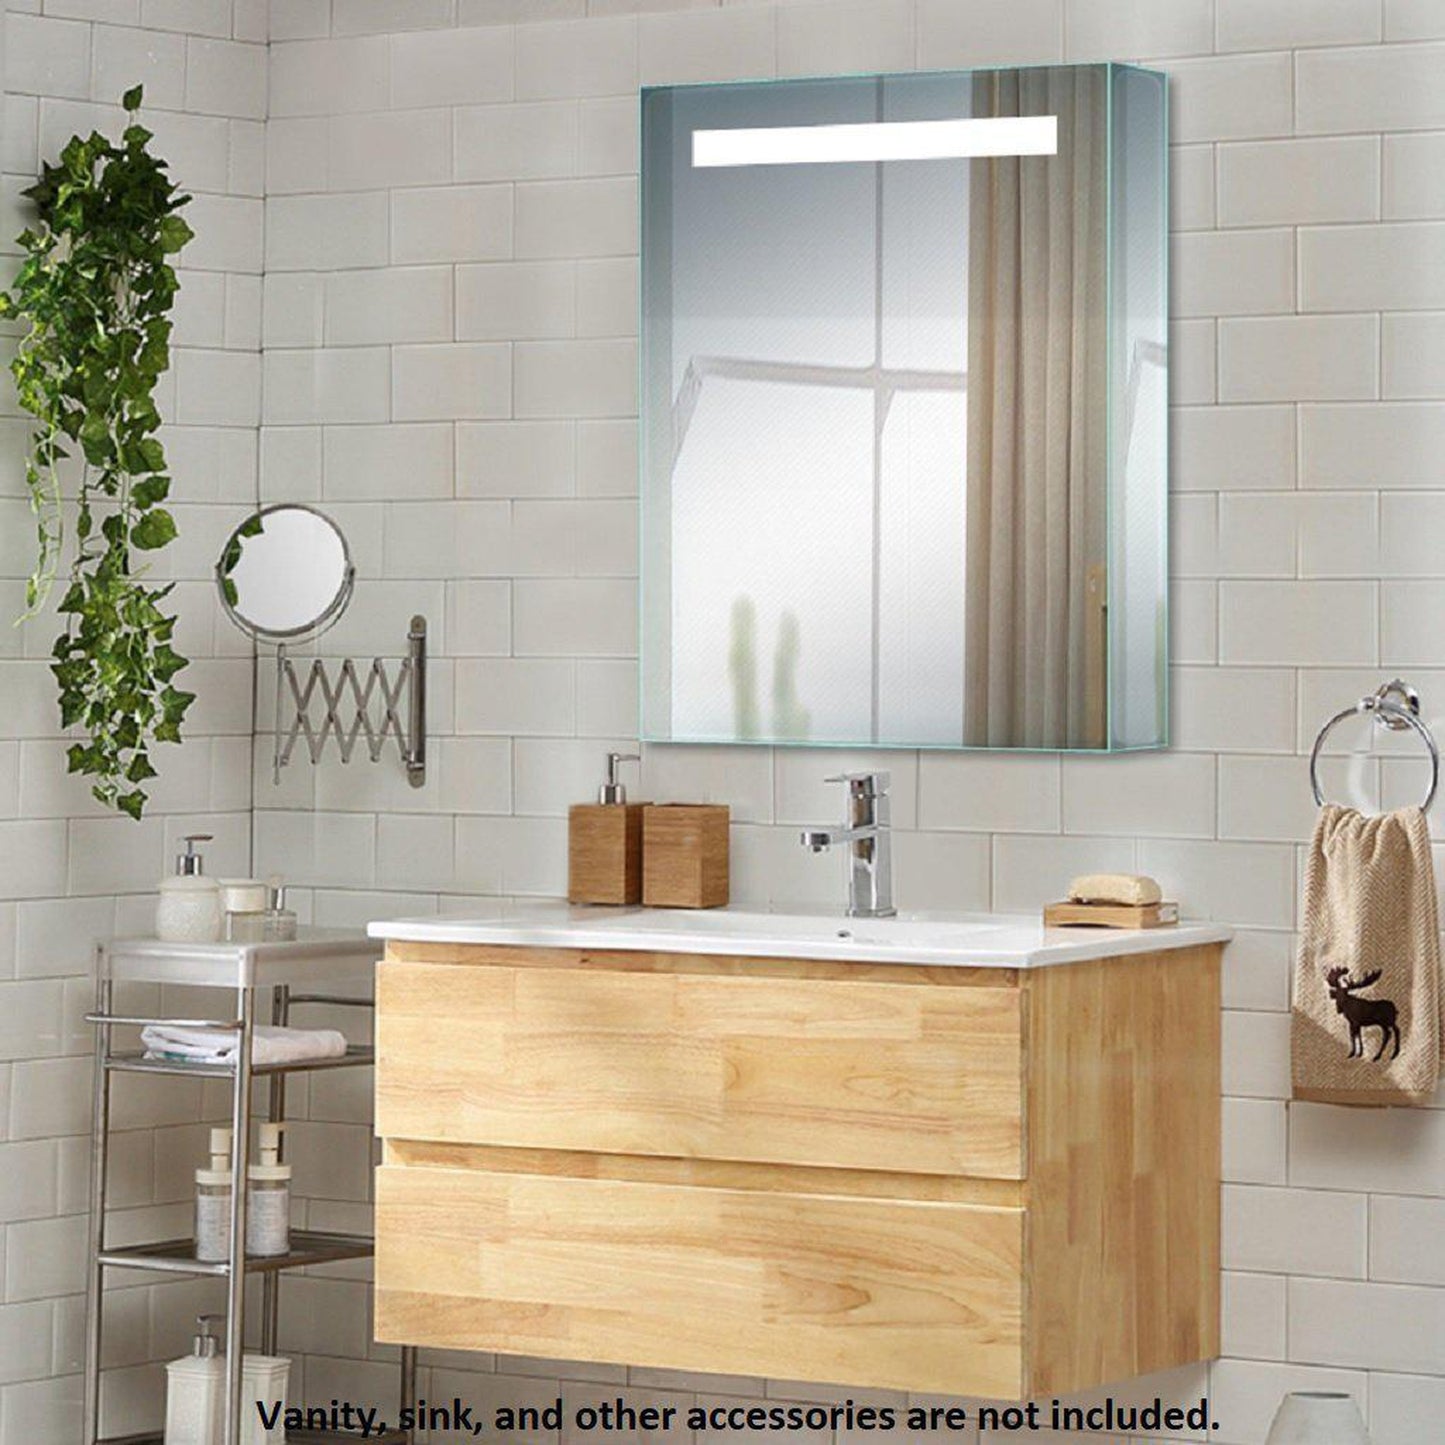 Lighted Impressions Espirit 18" x 26" Rectangular Framed Wall-Mounted LED Mirror Cabinet With Rocker Switch & Glass Shelves